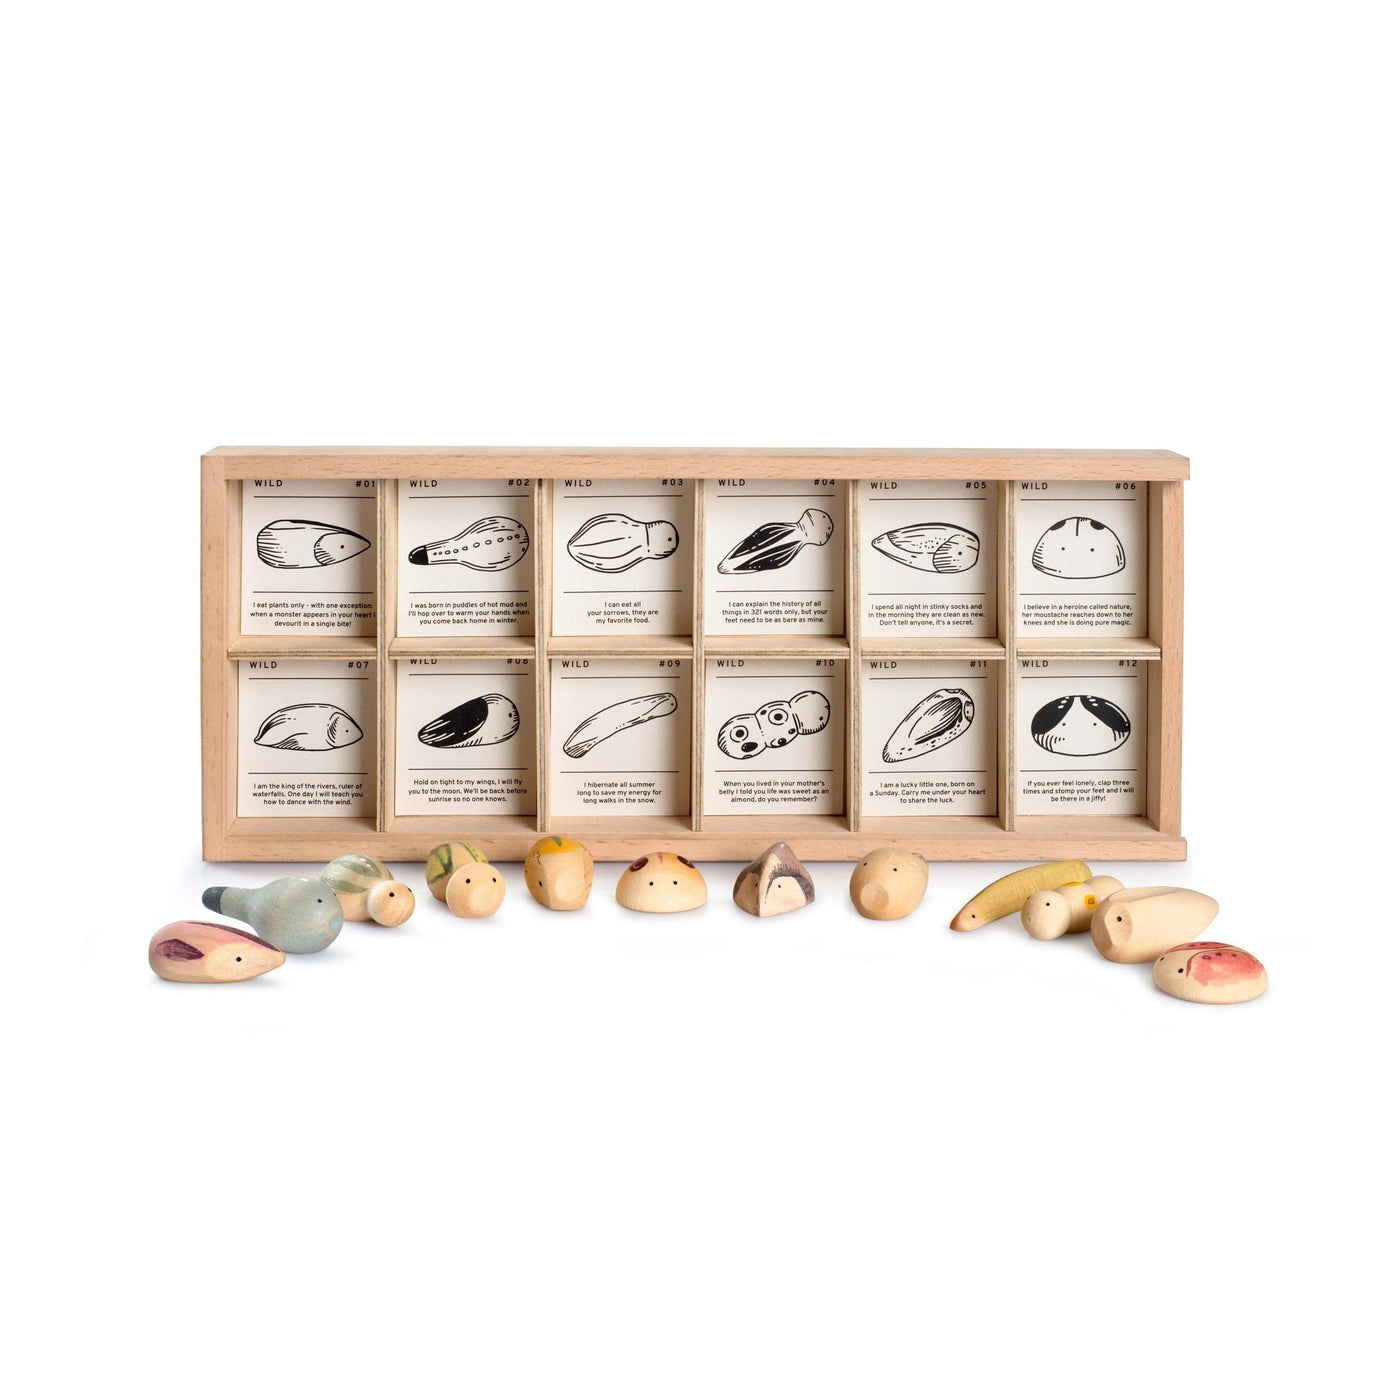 Grapat Wild -12 Wooden Creatures with Sorting Tray